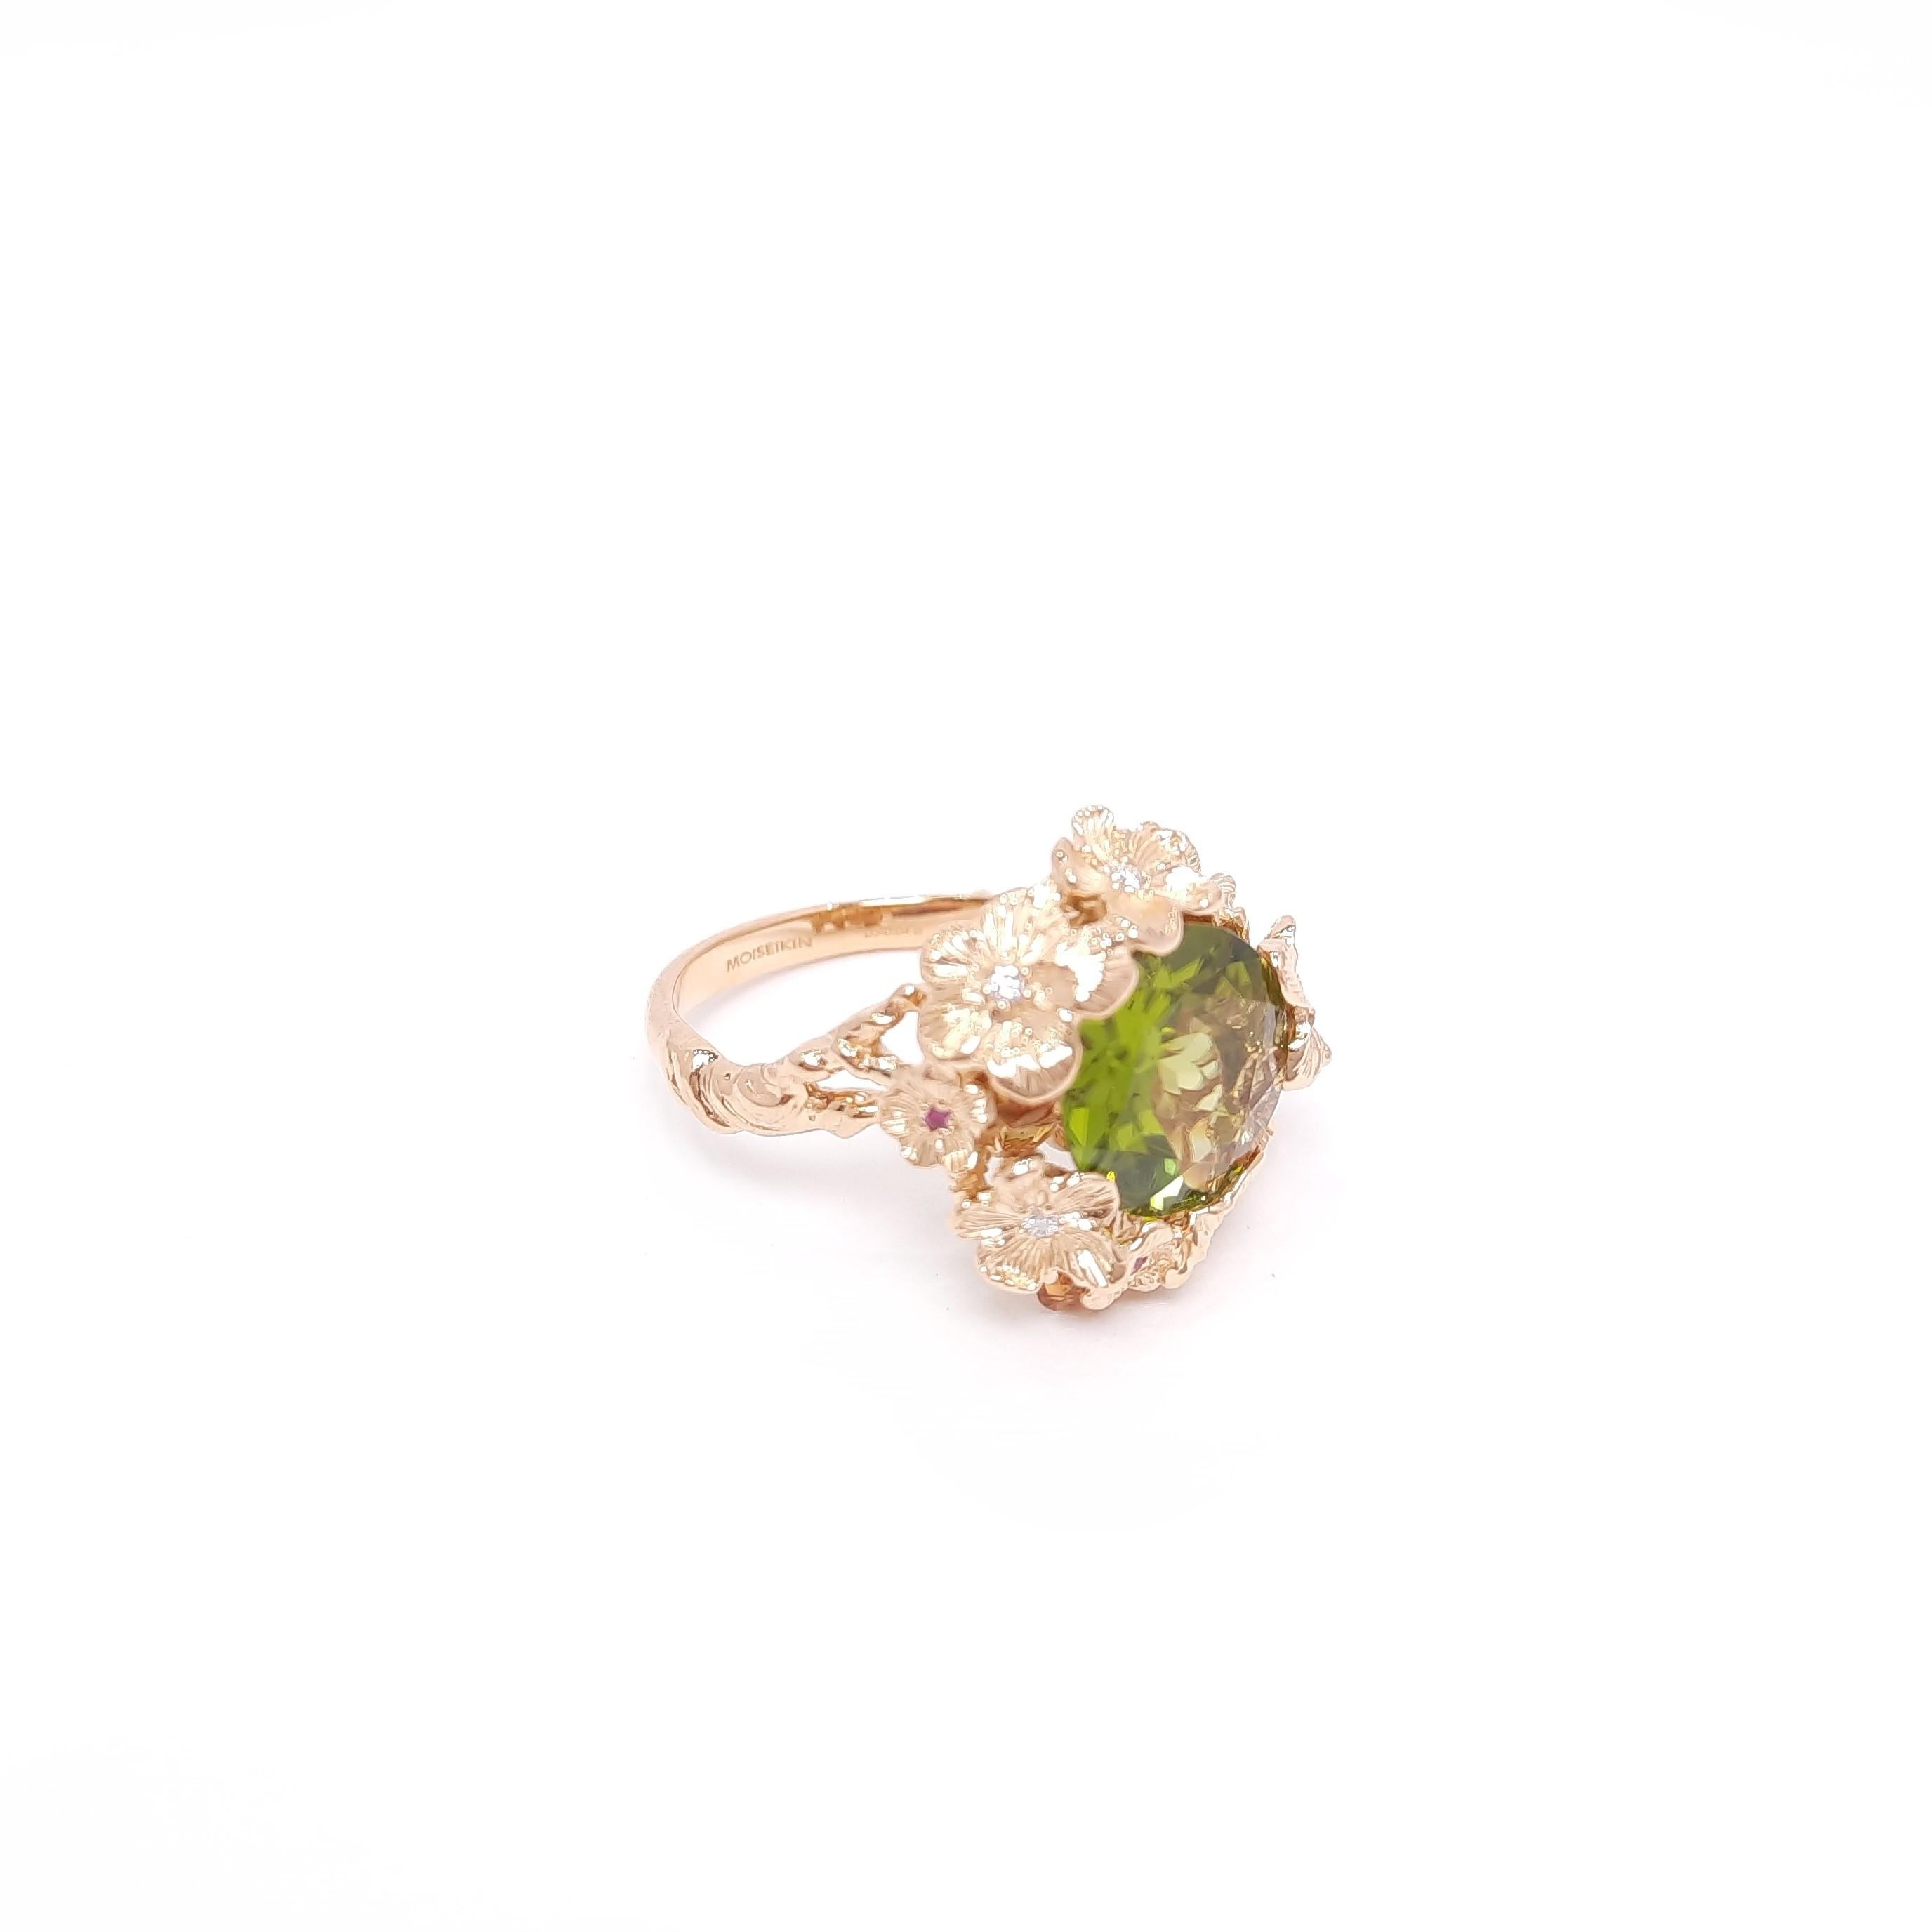 Since ancient times, people have worshiped Peridot as 